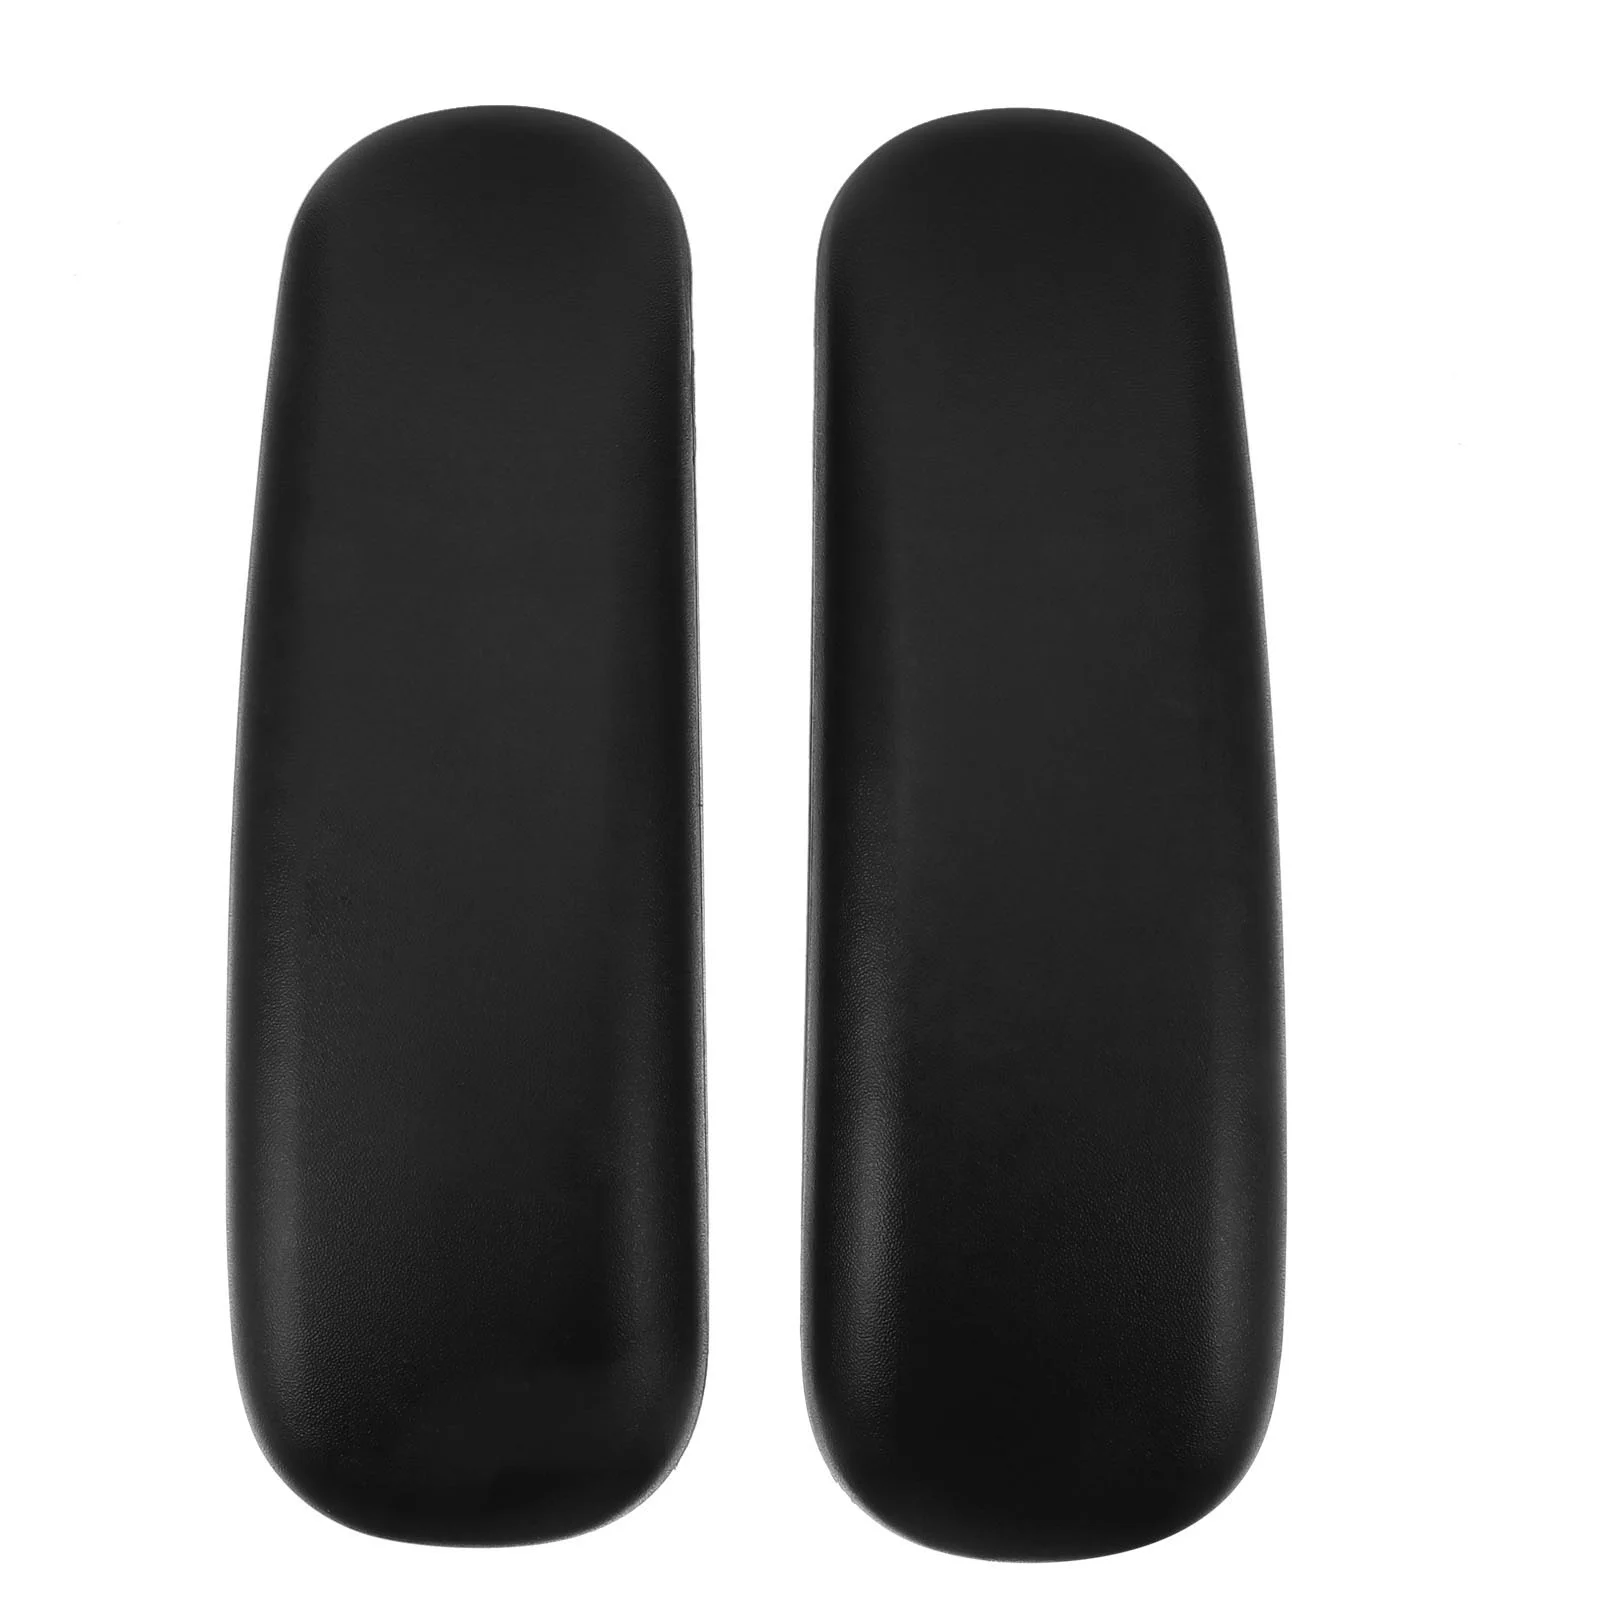 

Car Arm Rest Cover Armrest Chair Replacement Stress Reliever 24X7CM Pad PU Parts Black Polyurethane Cushion Office